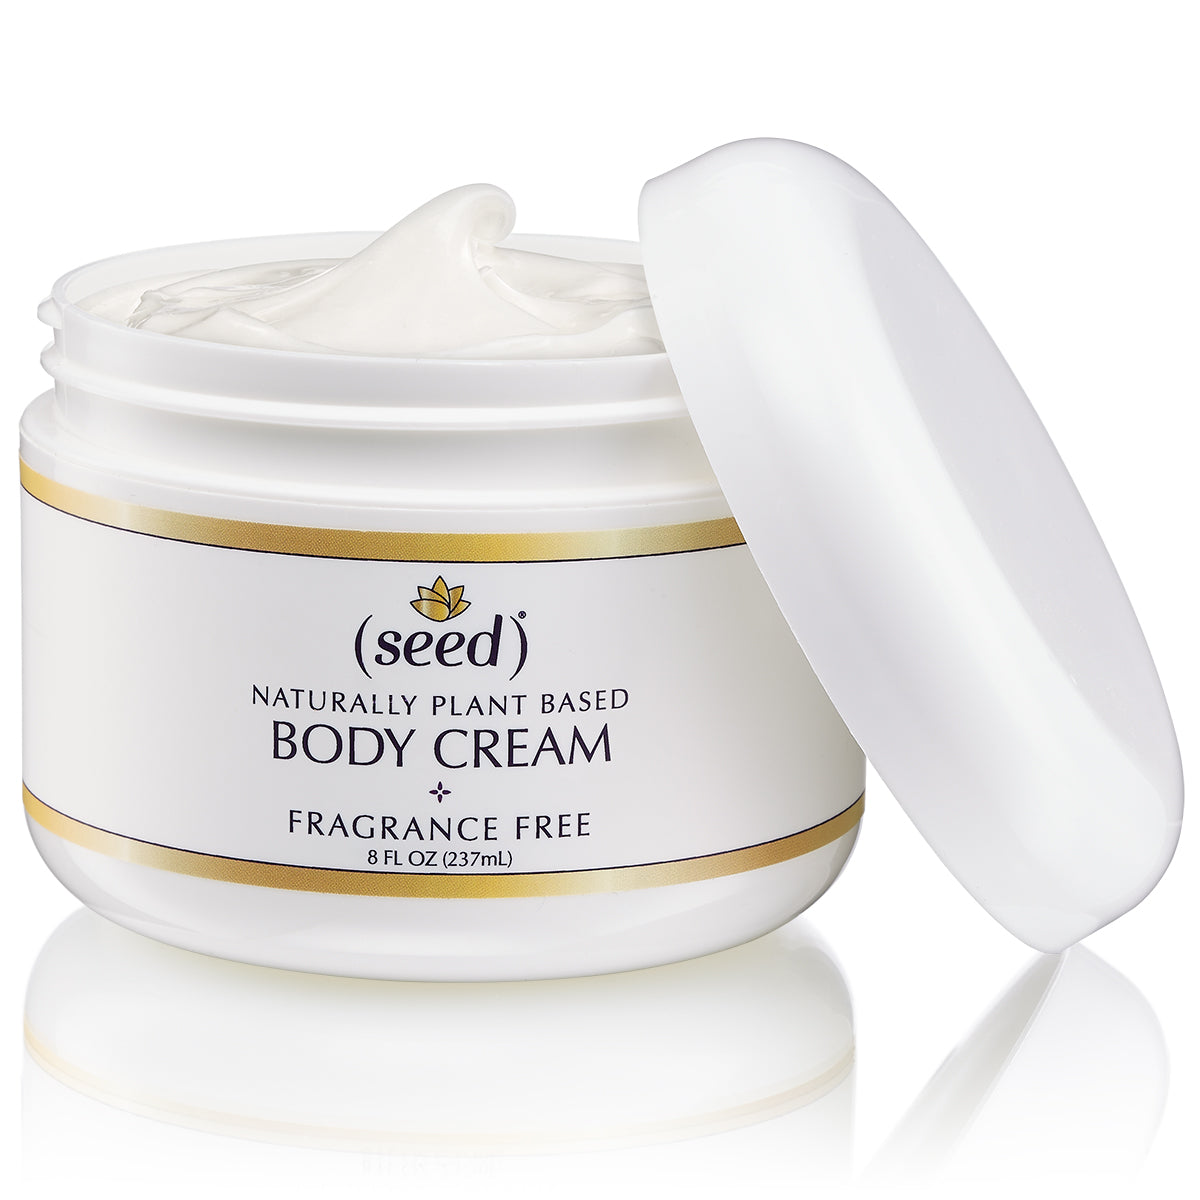 Seed Fragrance Free Body Cream with grape and sunflower seed oils, pure shea butter, and green tea extract